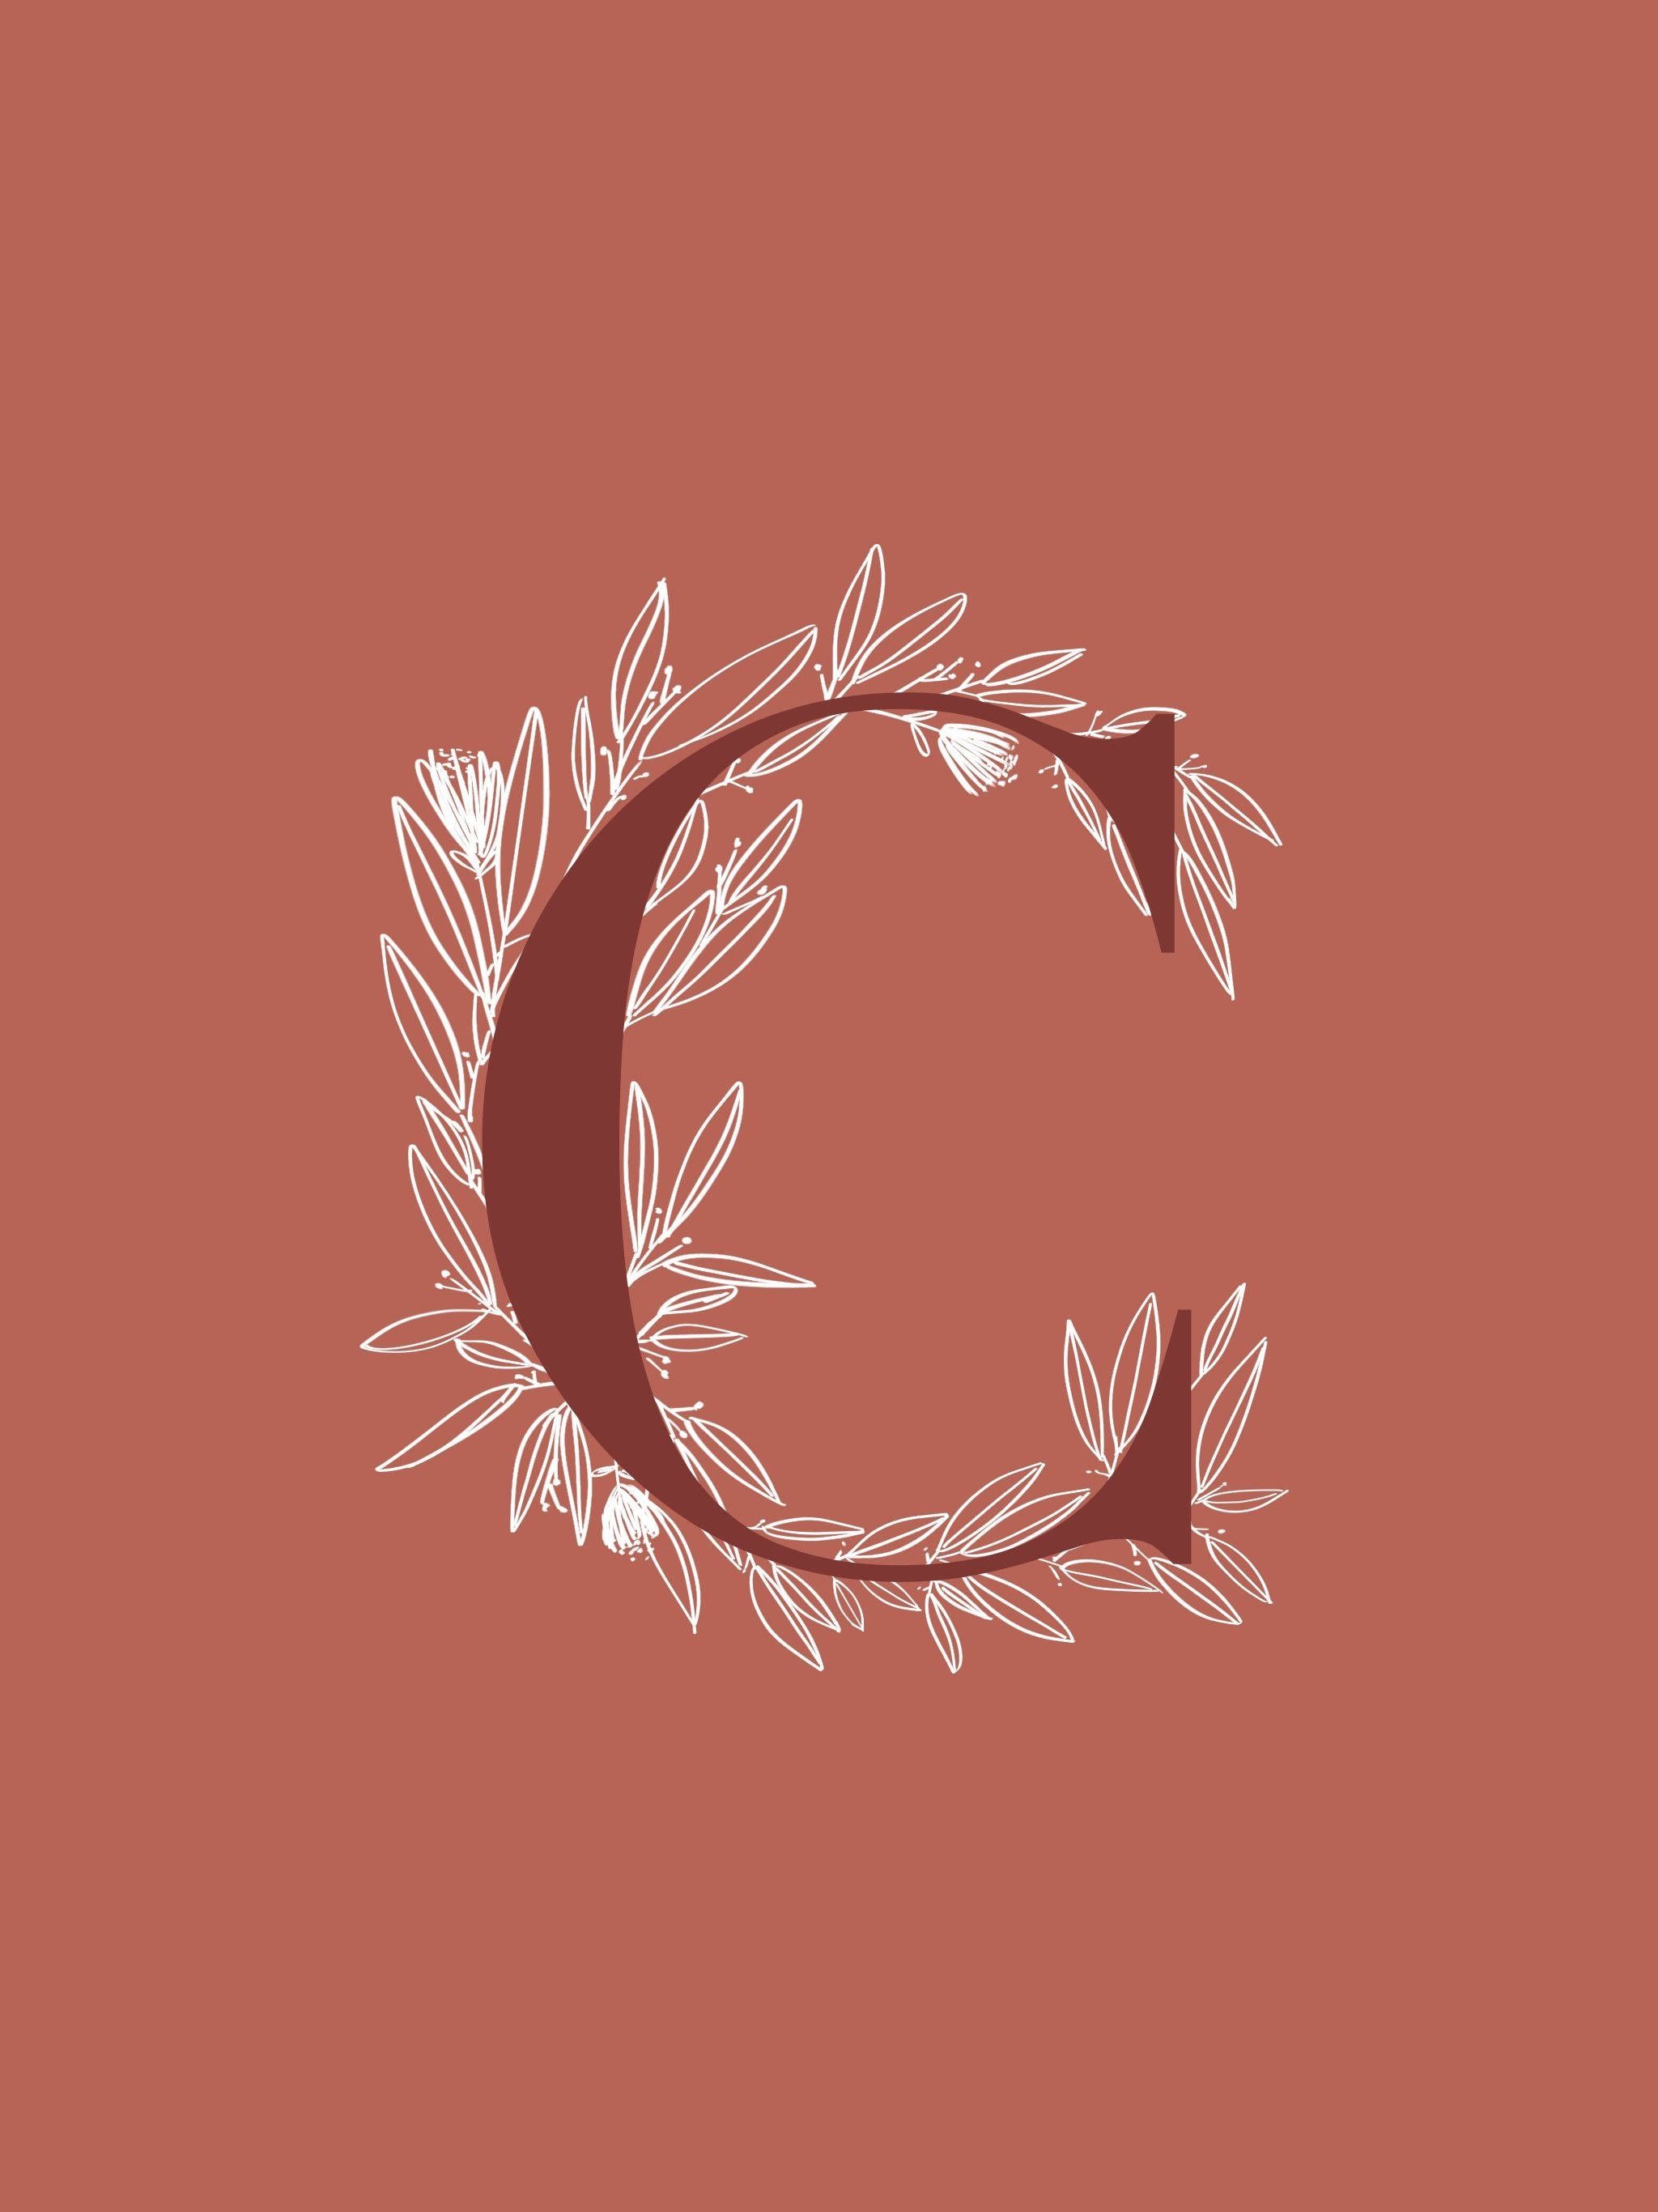 A brown letter C with a floral design on a brown background - Calligraphy